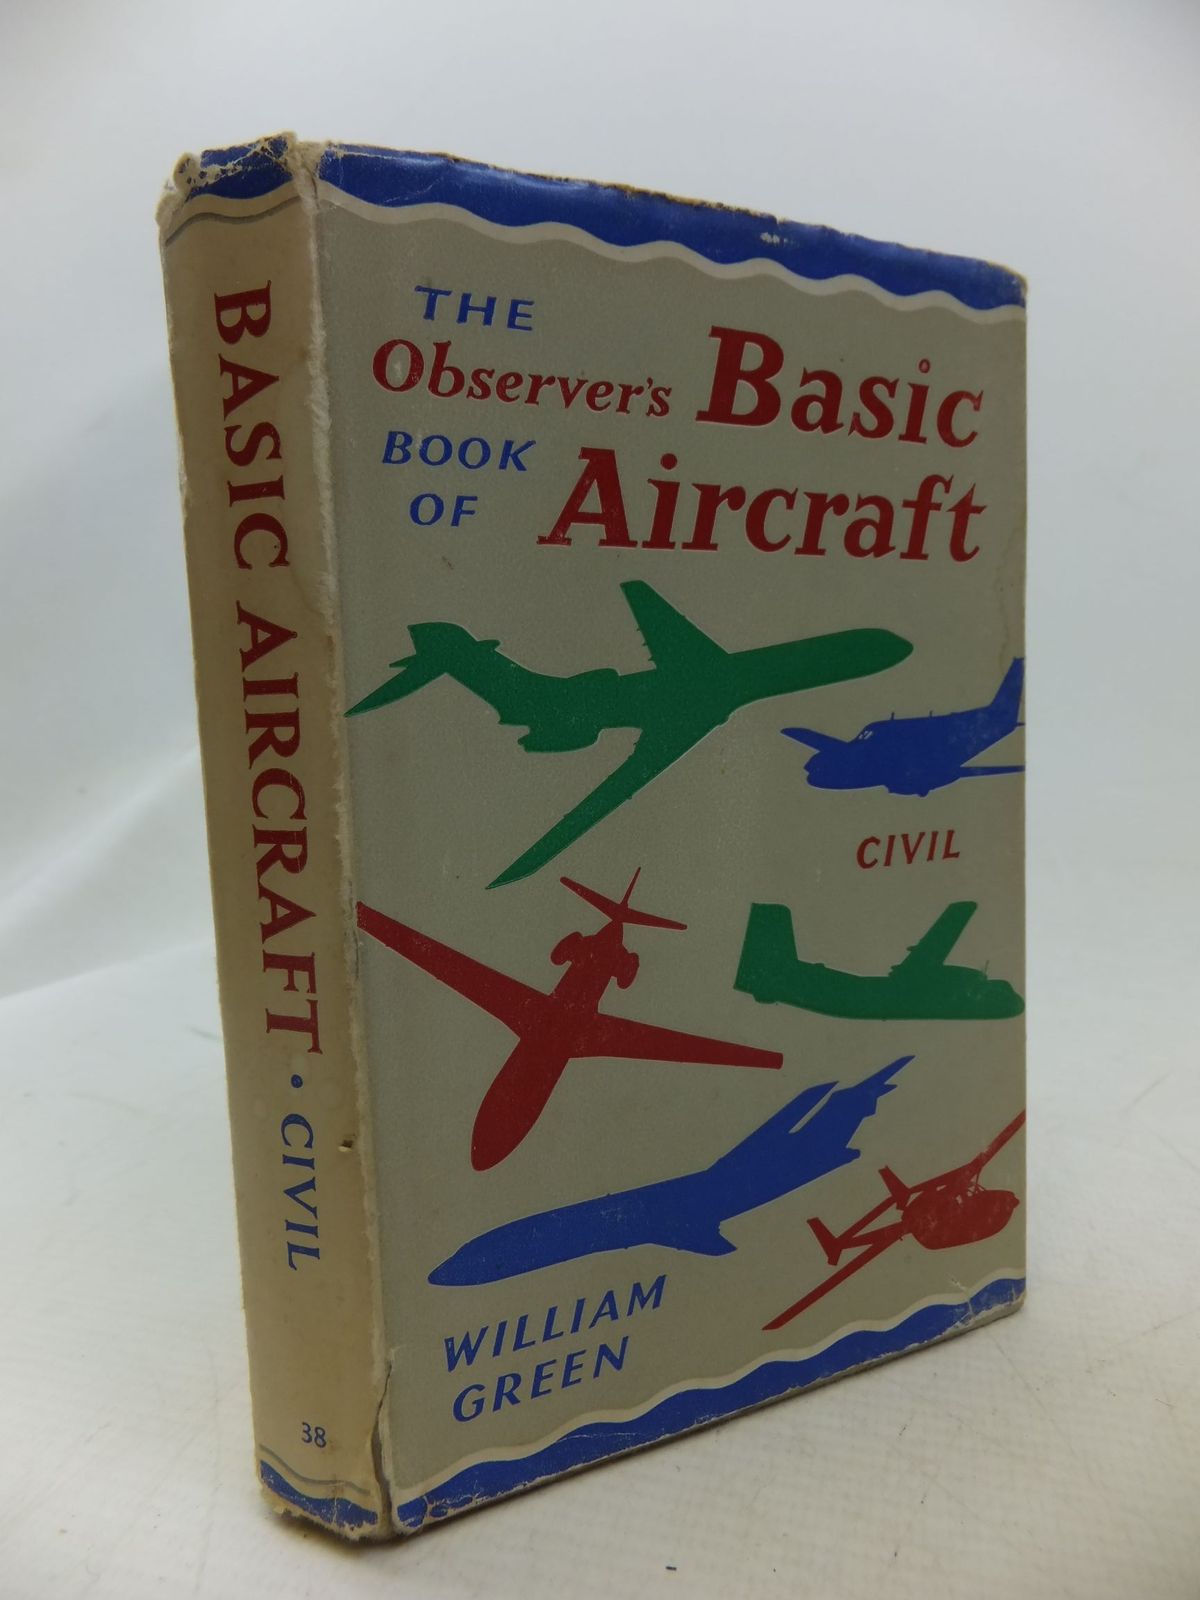 Stella & Rose's Books : THE OBSERVER'S BOOK OF BASIC AIRCRAFT: CIVIL ...